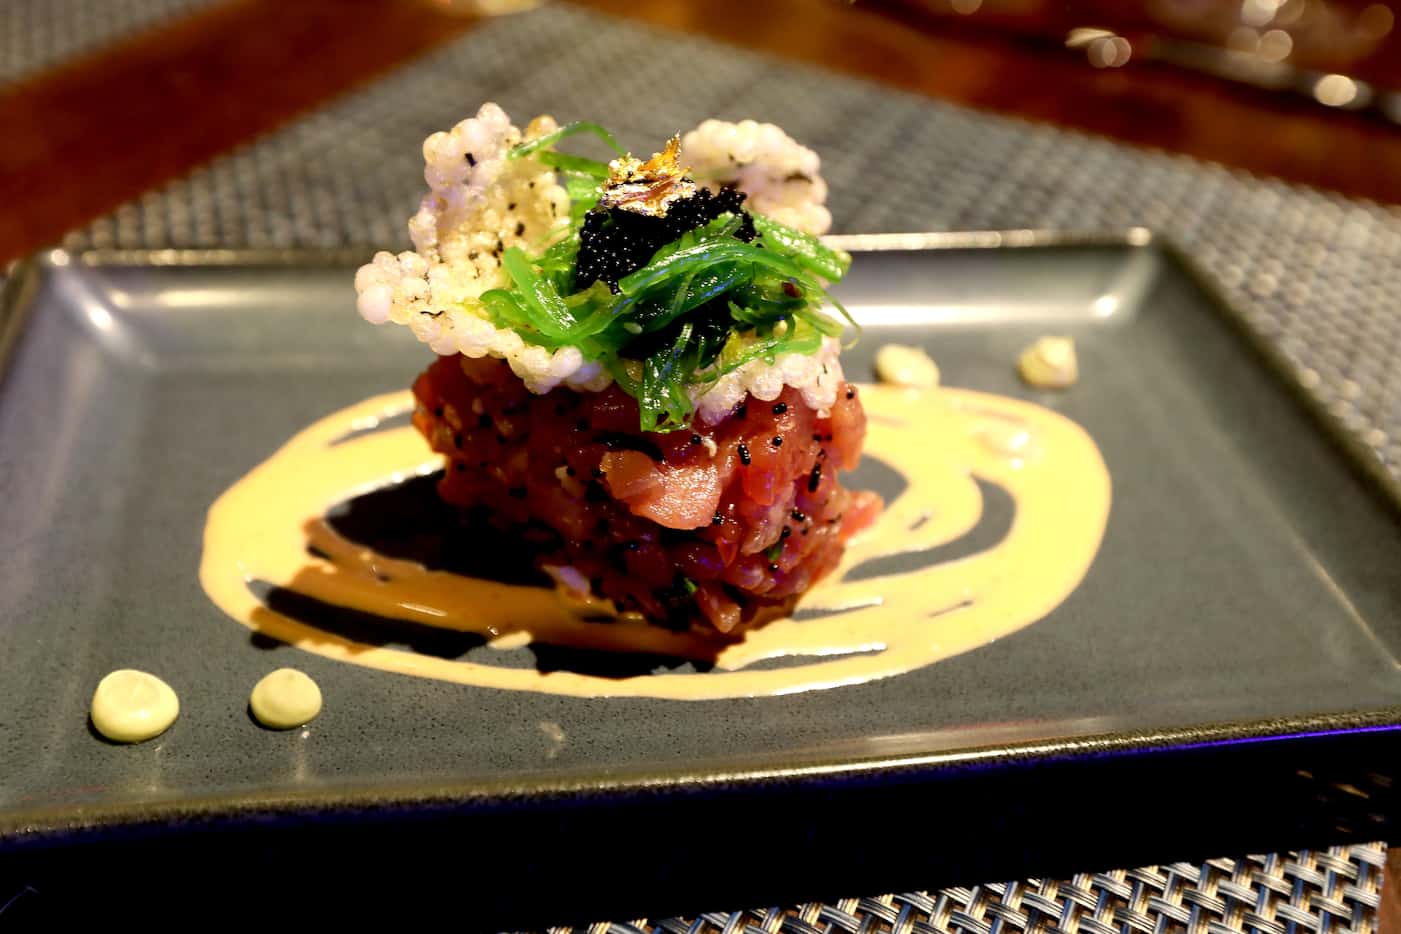 Tuna tartare with avocado mousse, wakame, crispy peal, tobiko and dashi soy reduction at The...